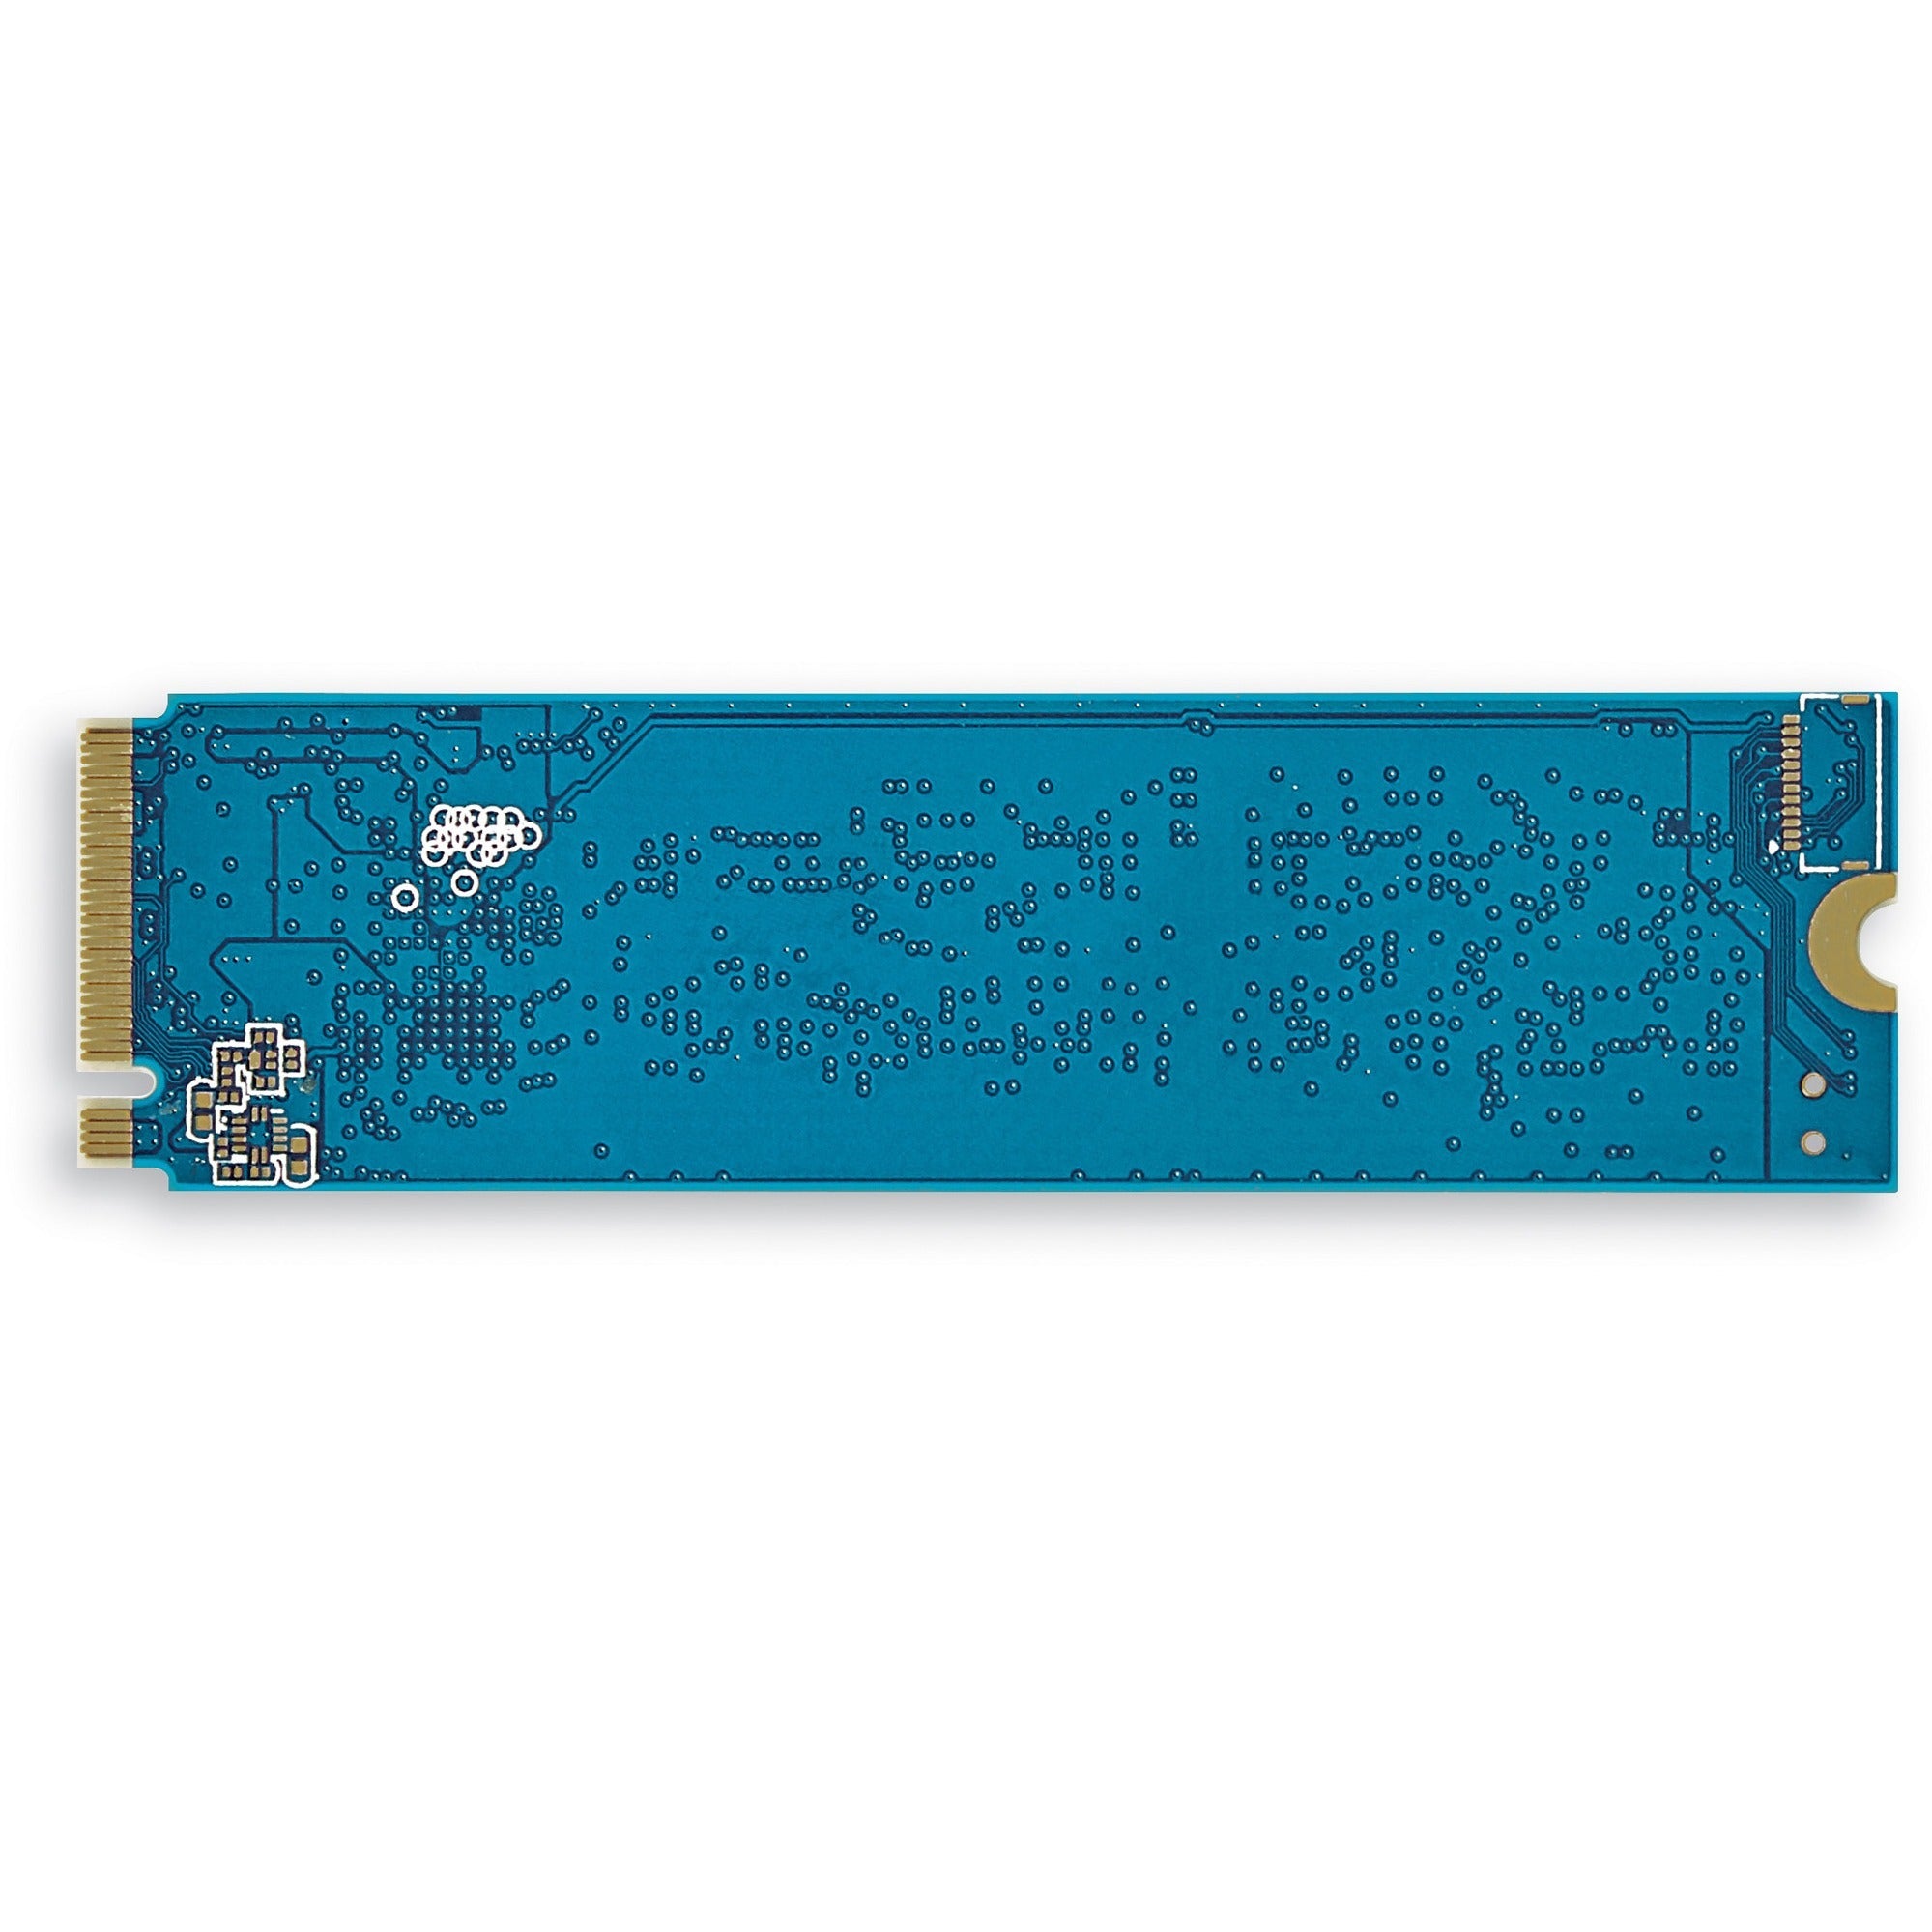 verbatim-vi3000-2-tb-solid-state-drive-m2-2280-internal-pci-express-nvme-pci-express-nvme-30-x4-notebook-desktop-pc-device-supported-1200-tb-tbw-3000-mb-s-maximum-read-transfer-rate-5-year-warranty_ver70874 - 2